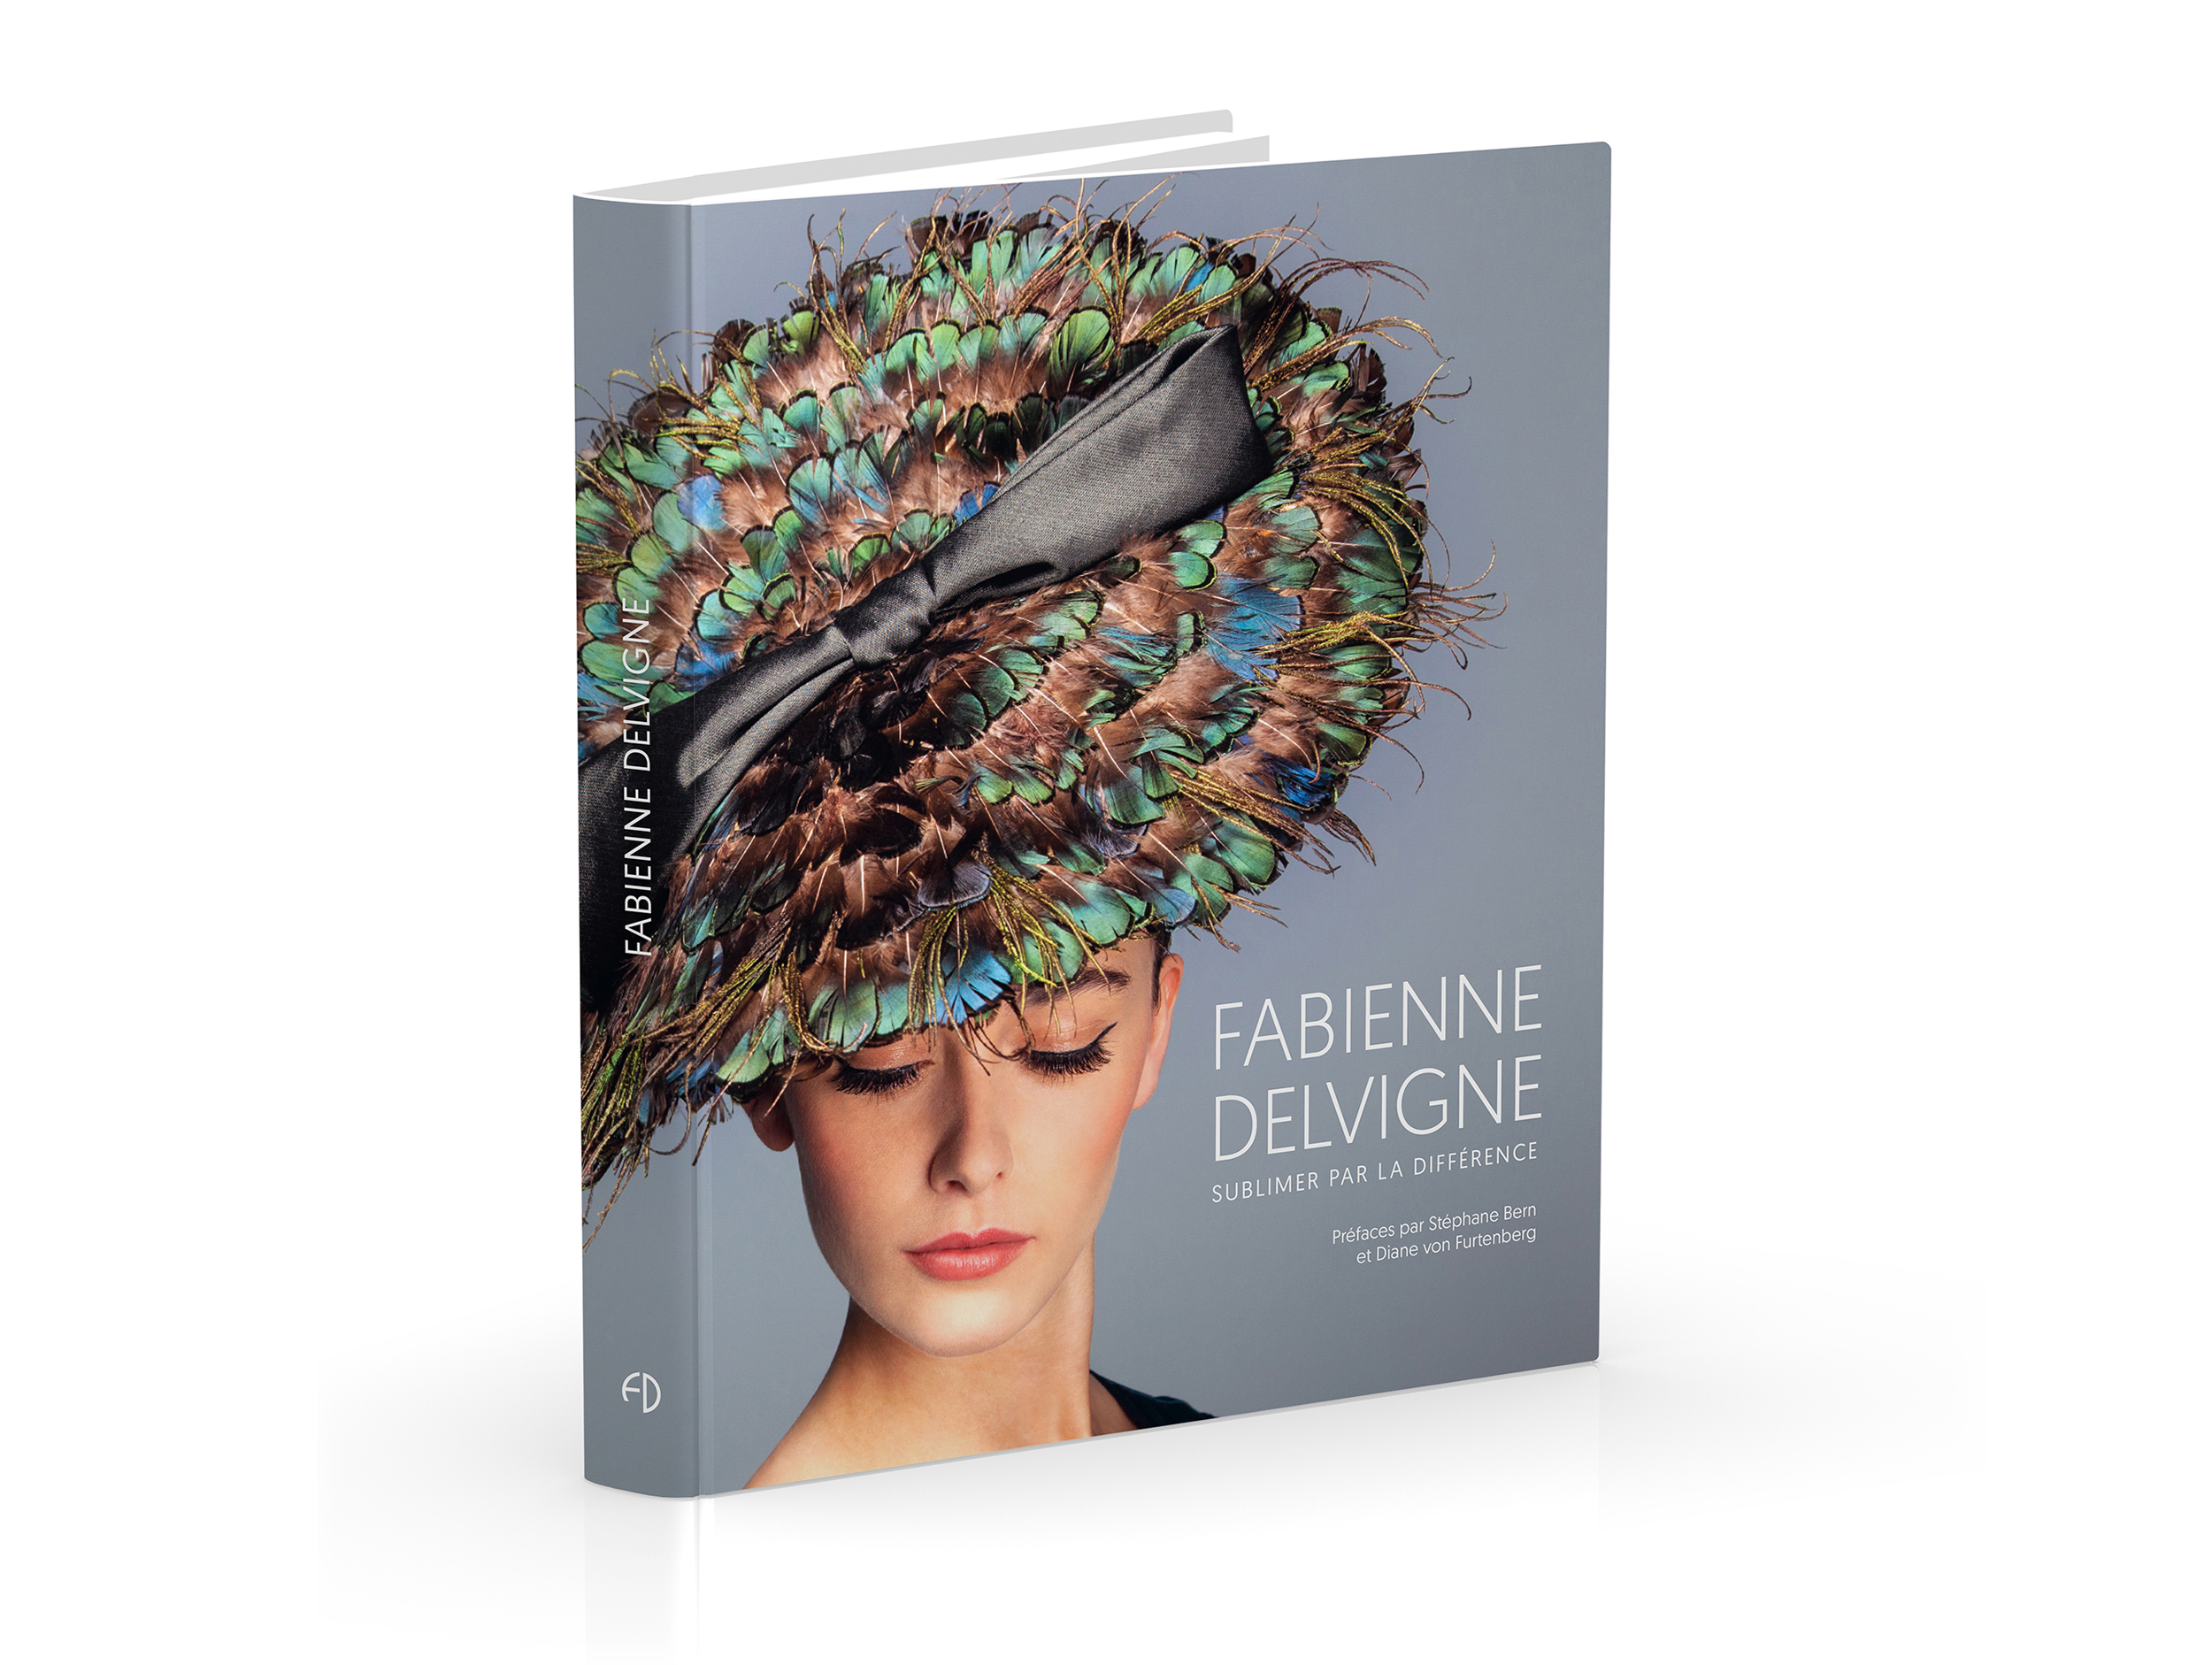 The book traces the exceptional career of Fabienne Delvigne, the hat designer and craftswoman who creates high-end luxury products.